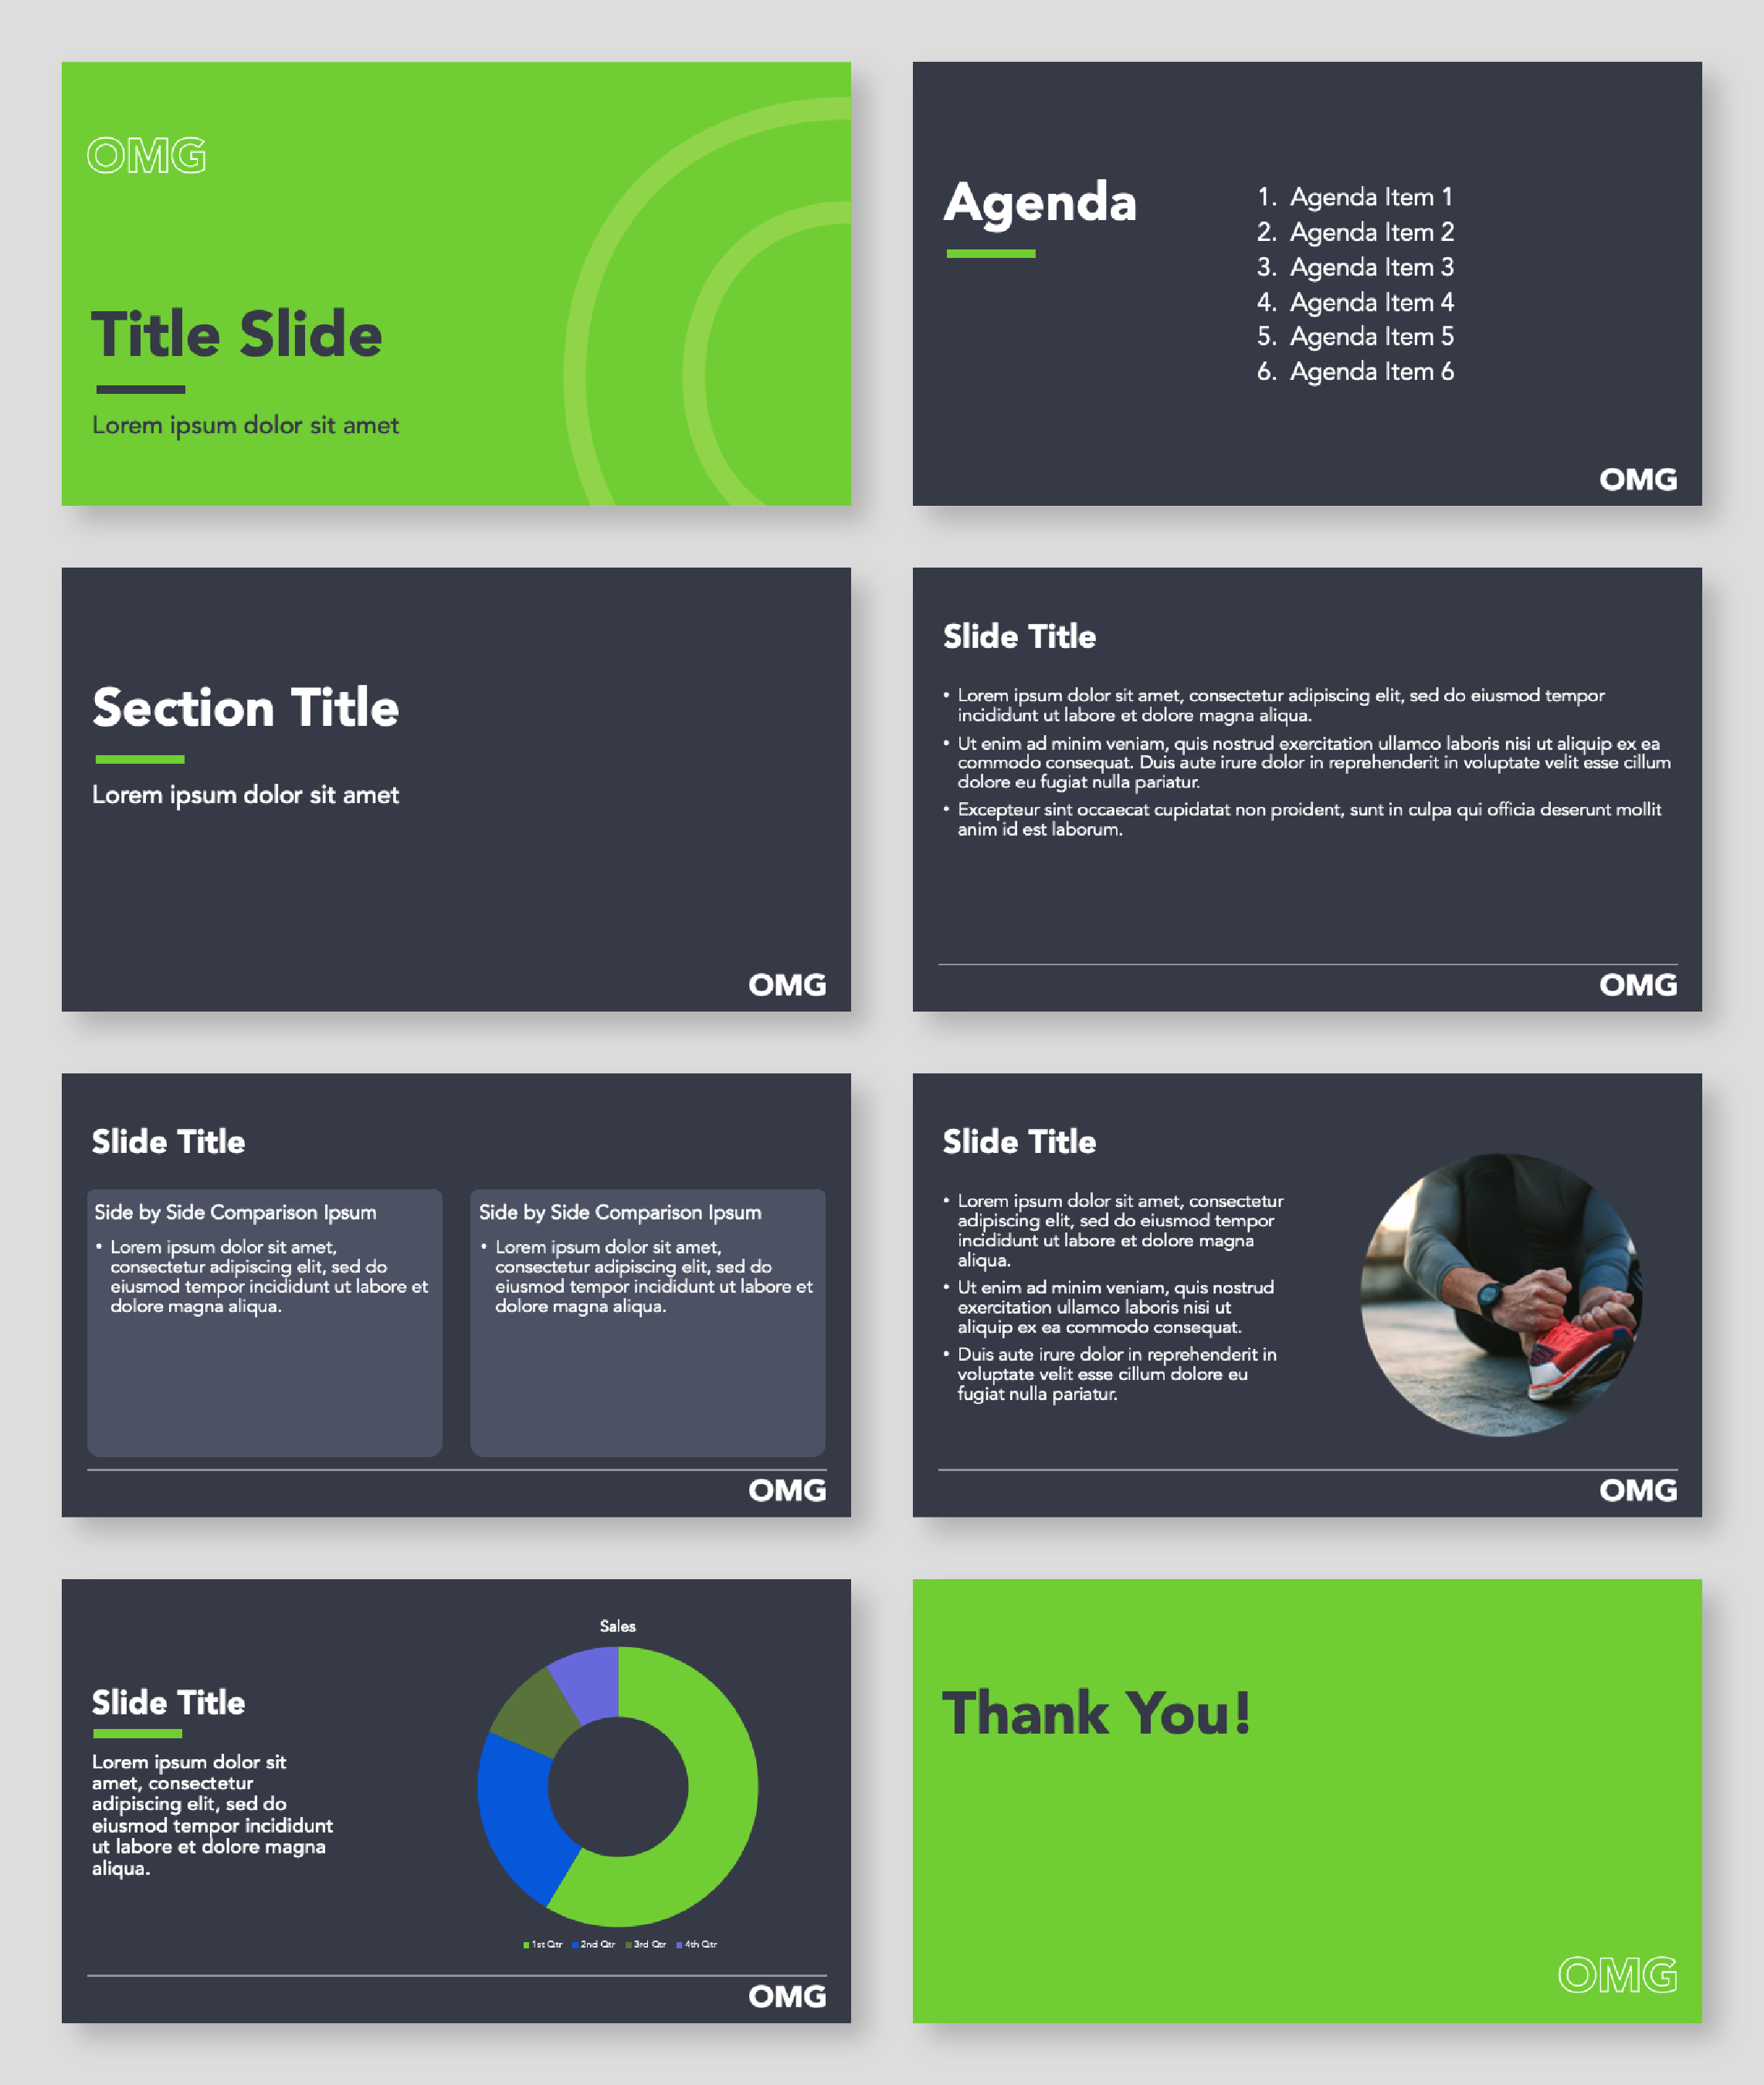 slides from the omg powerpoint deck template